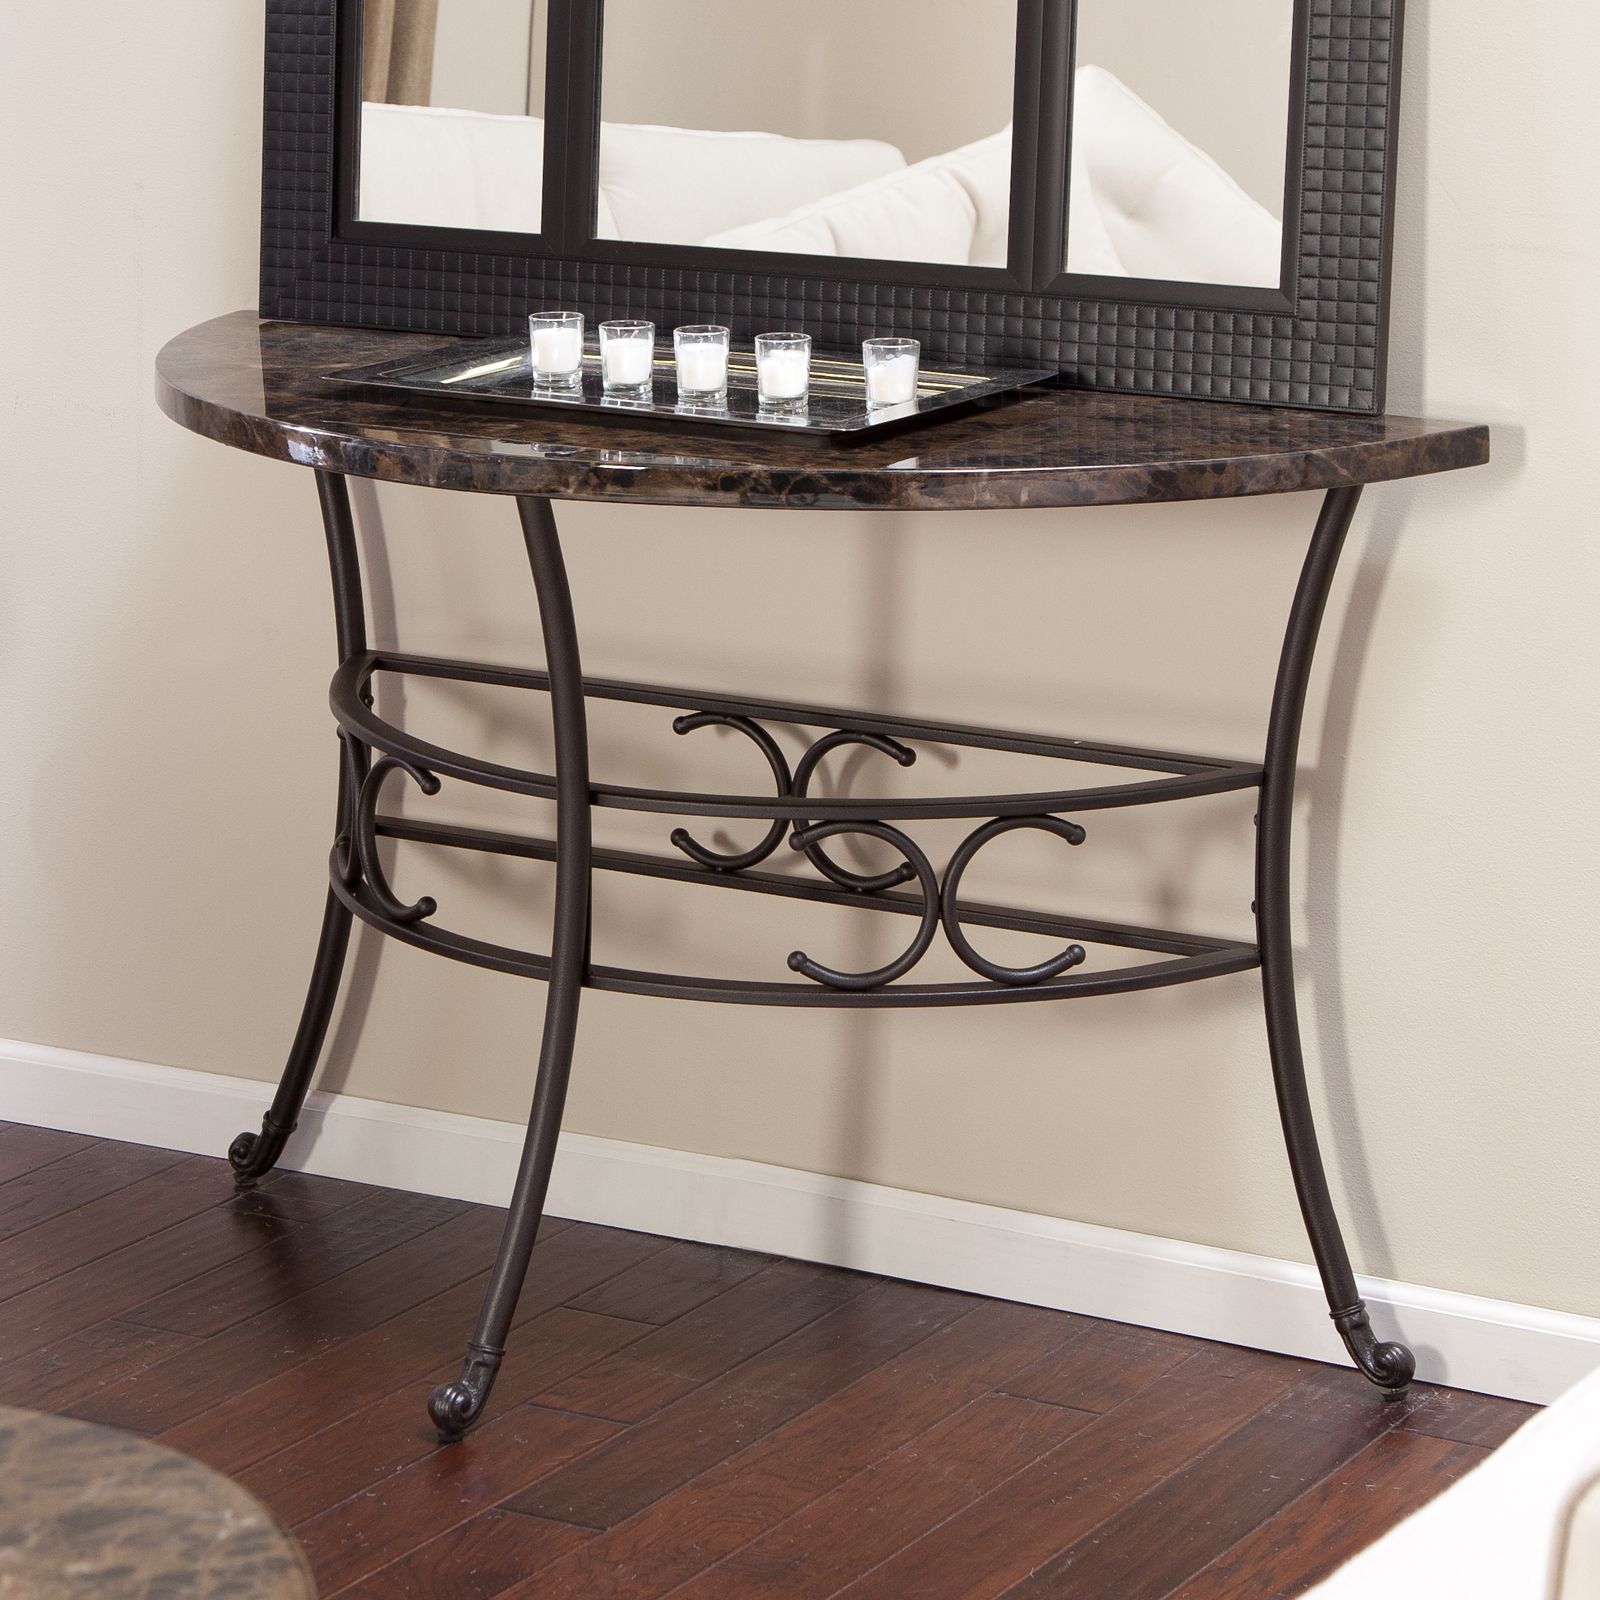 Muschio Faux Marble Console Table At Hayneedle Intended For Marble And White Console Tables (View 5 of 20)